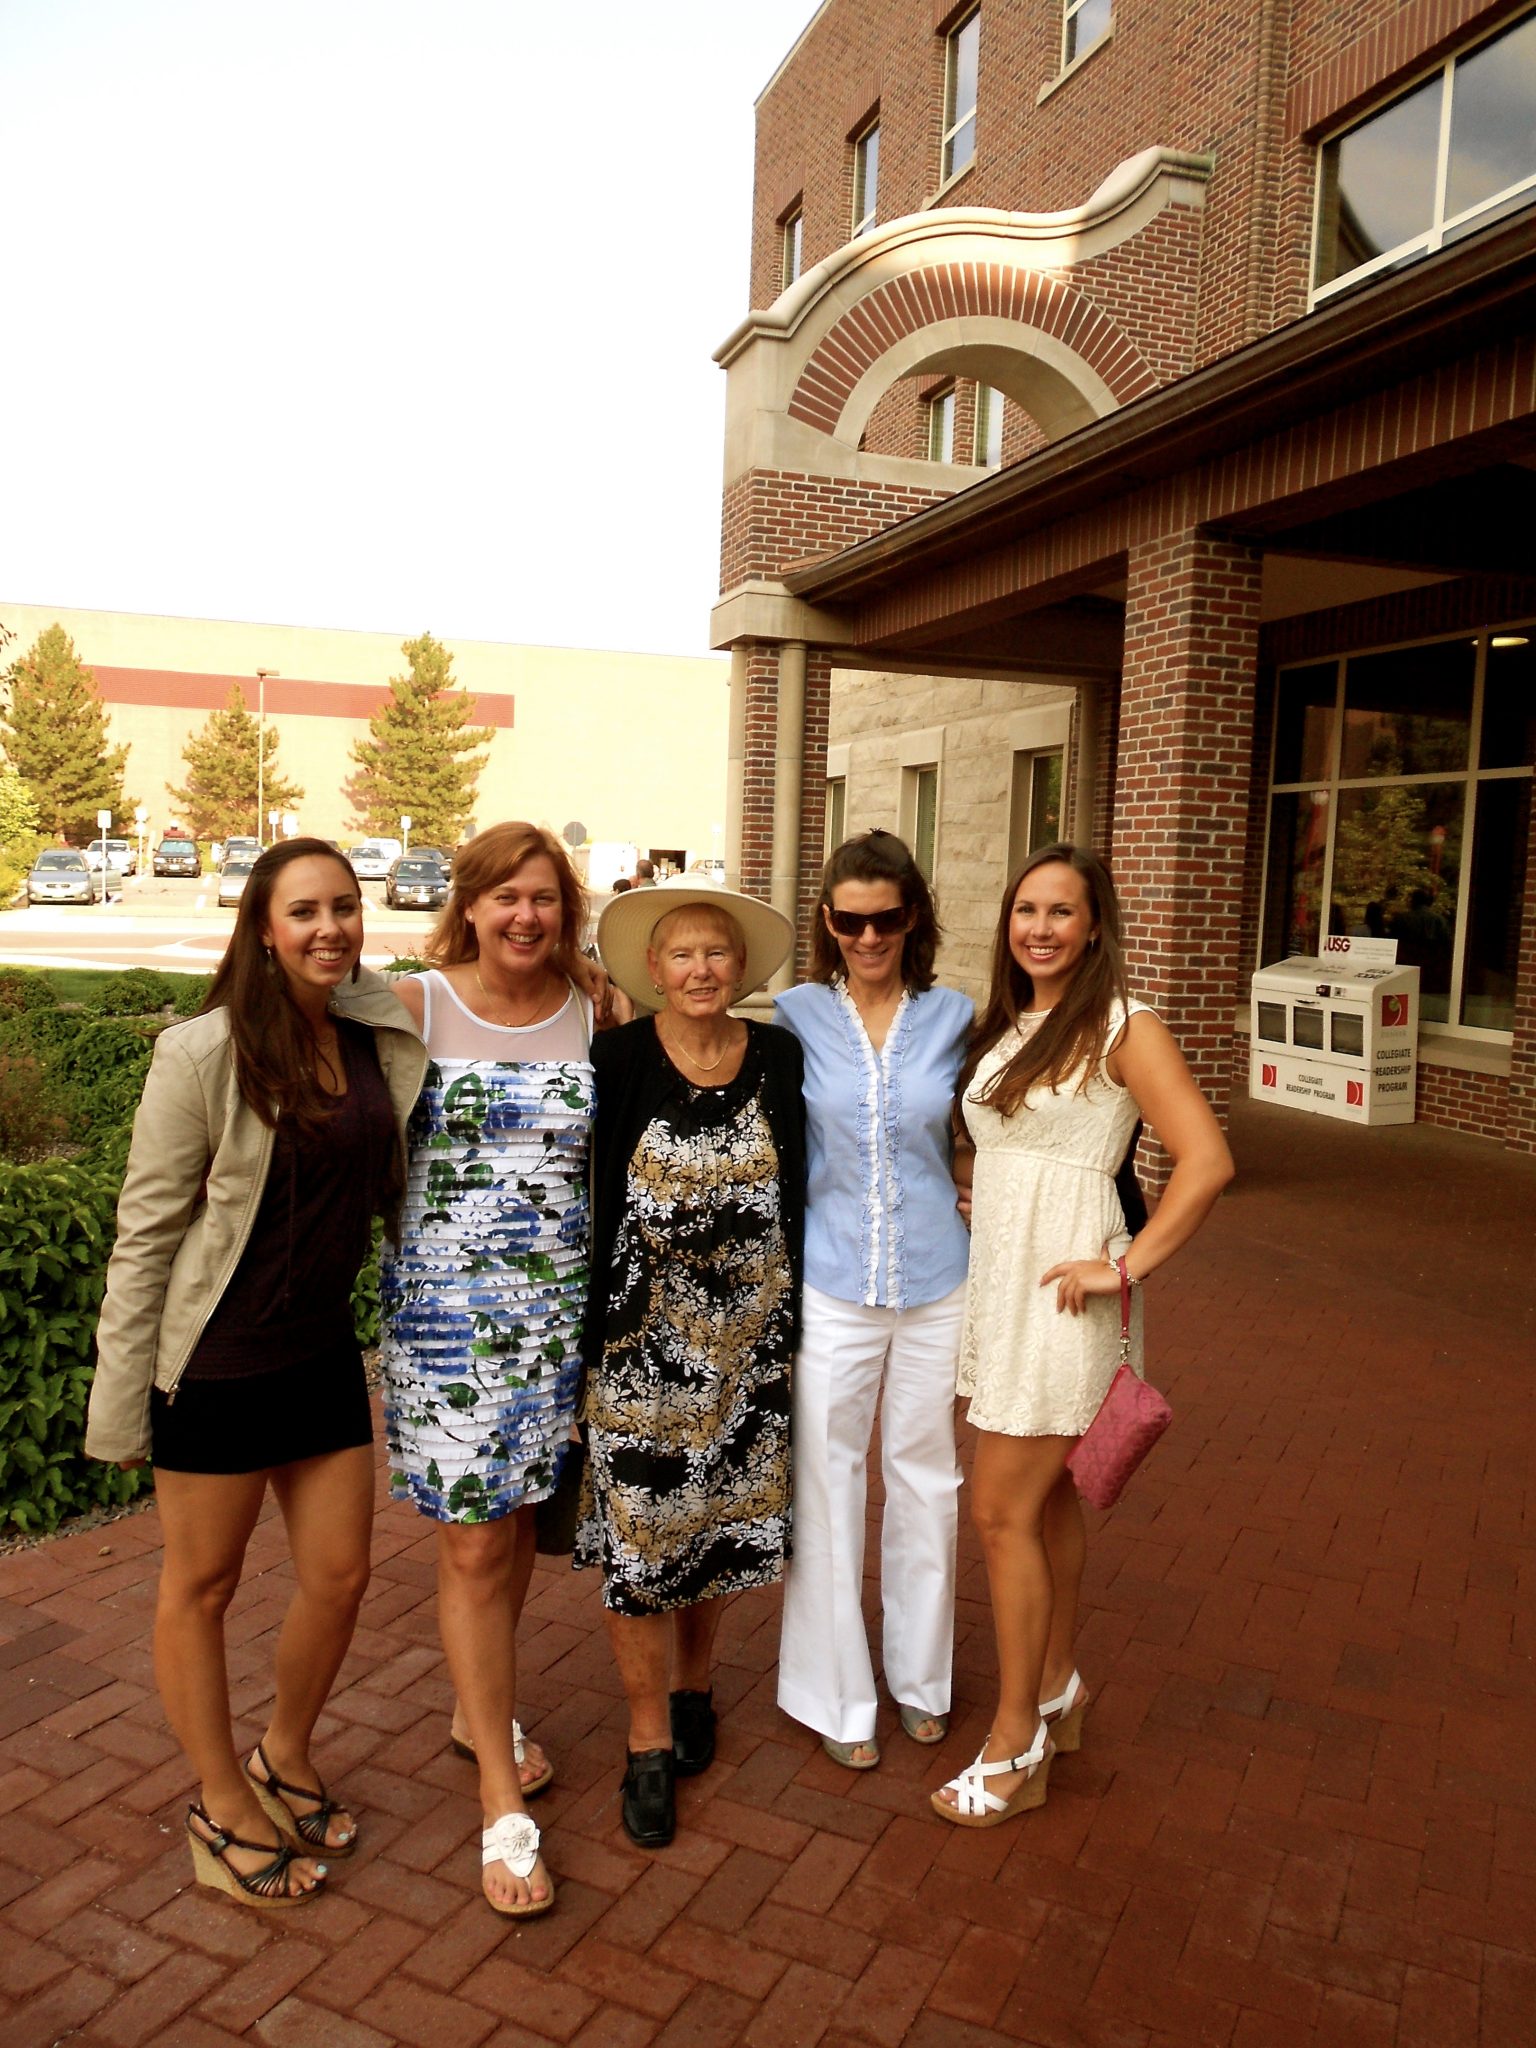 Oma and her granddaughters, daughter in law and daughter at the University of Denver